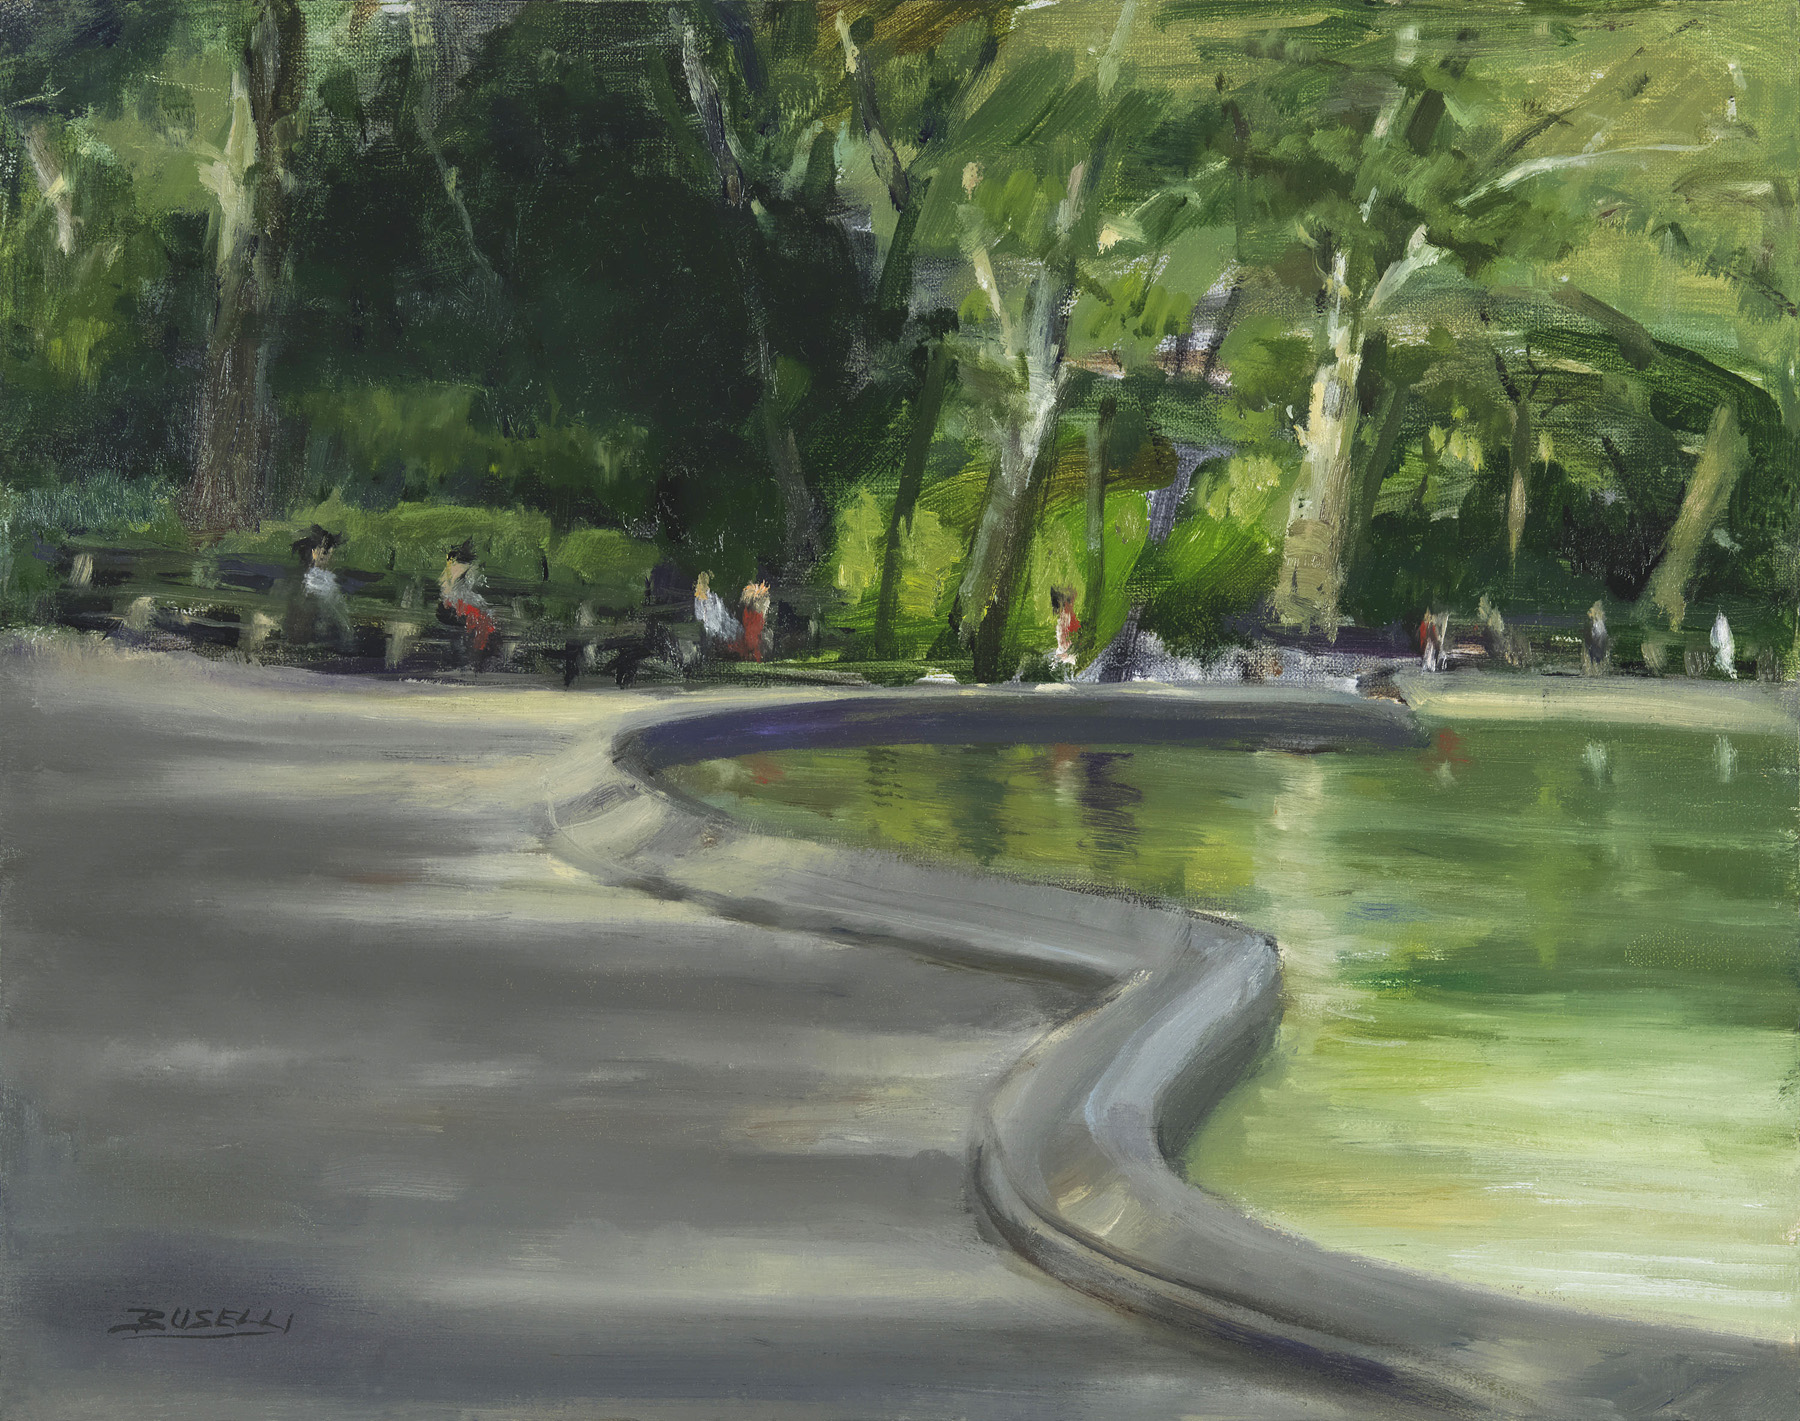  ‘LATE AFTERNOON SHADOWS AT THE BOAT POND, CENTRAL PARK, NYC”  oil on linen | 11” x 14” 